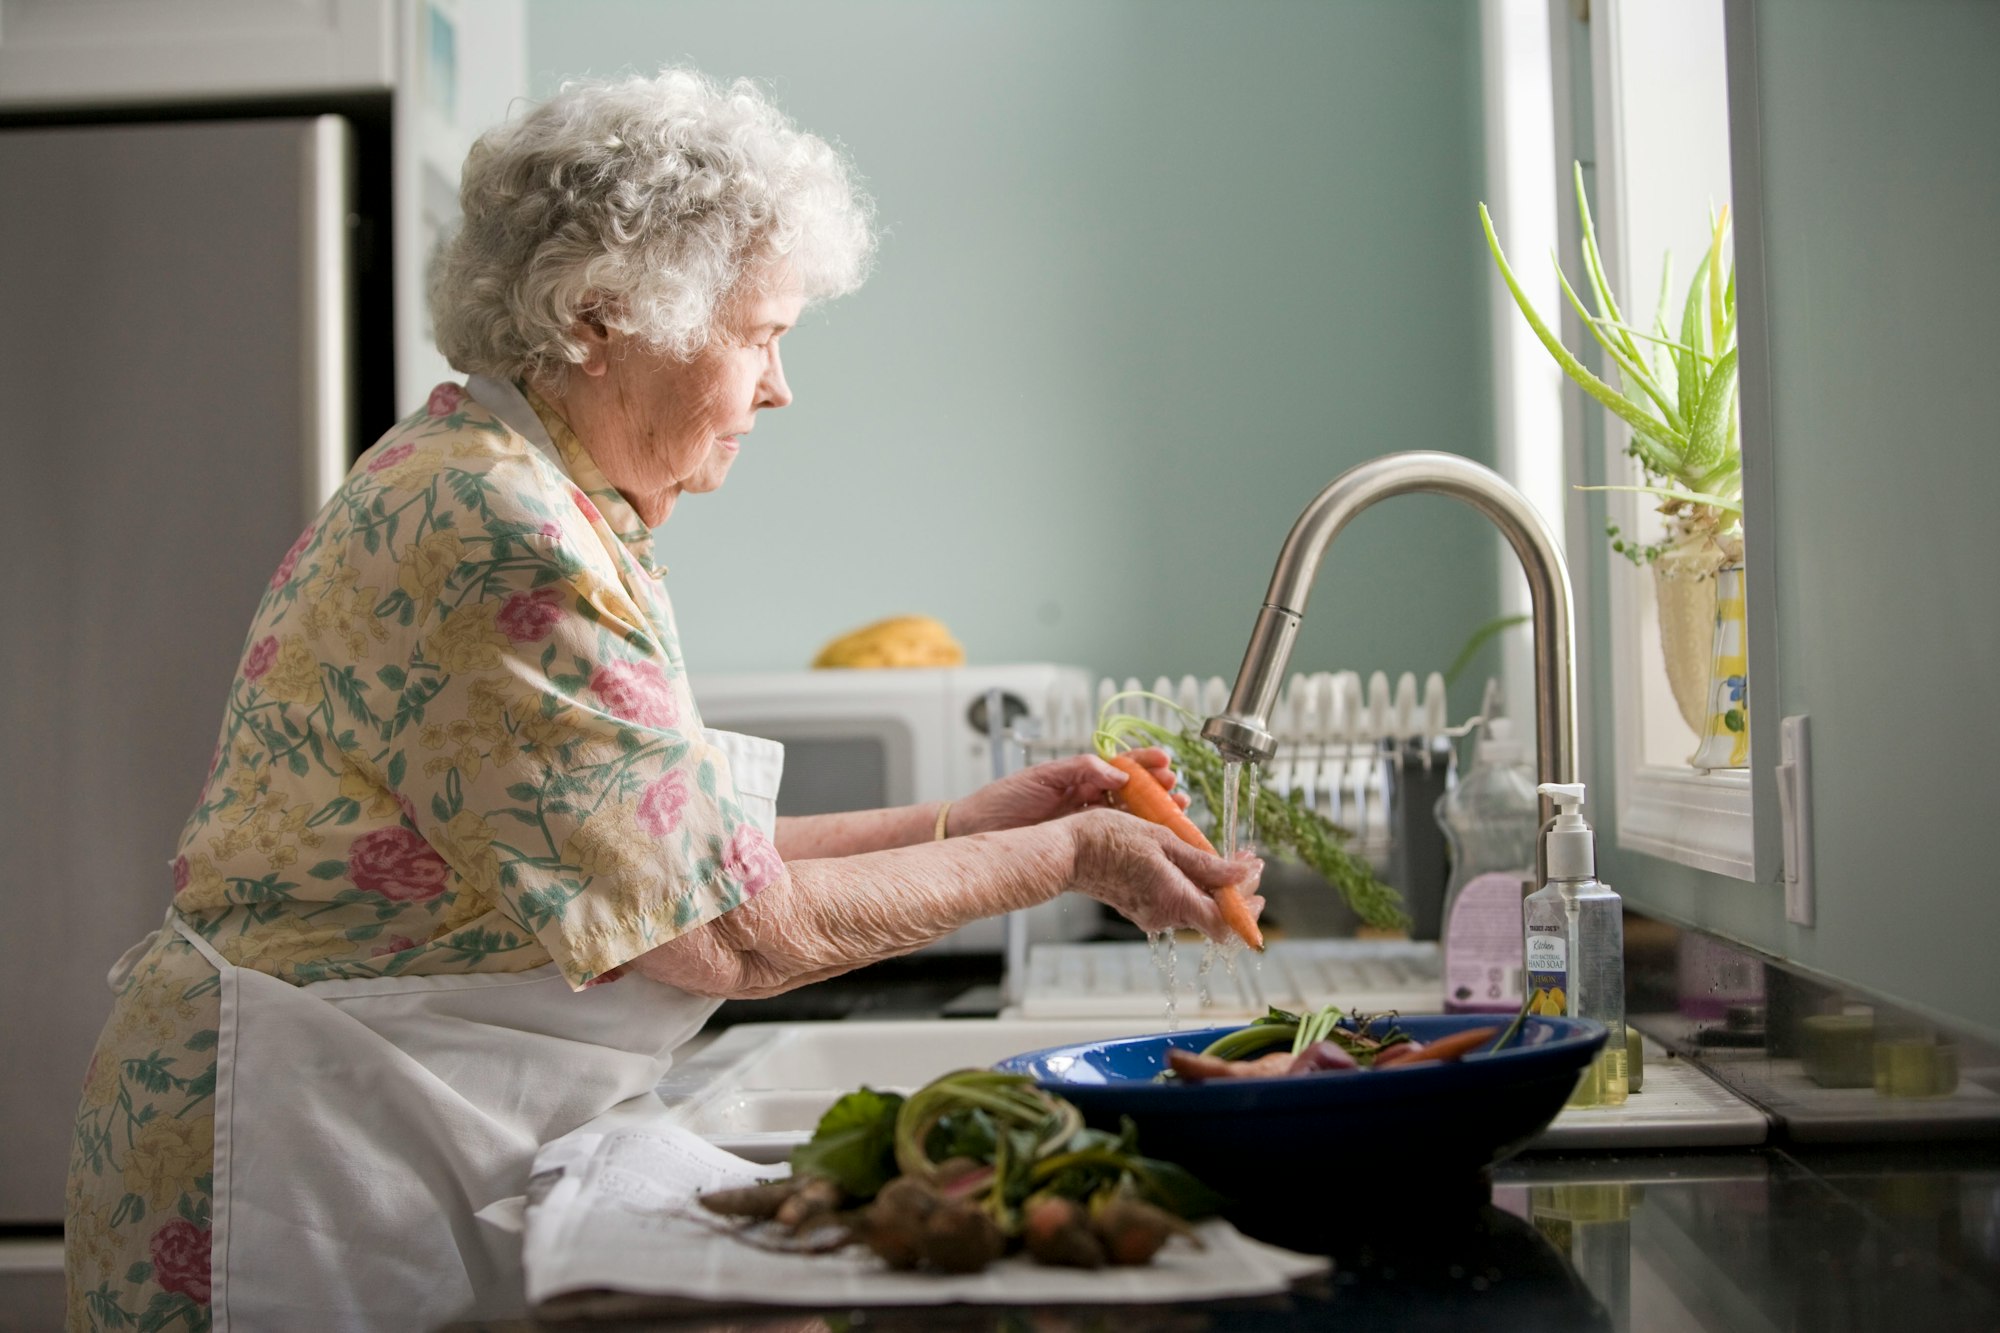 Elderly woman cleaning vegetables in the kitchen sink